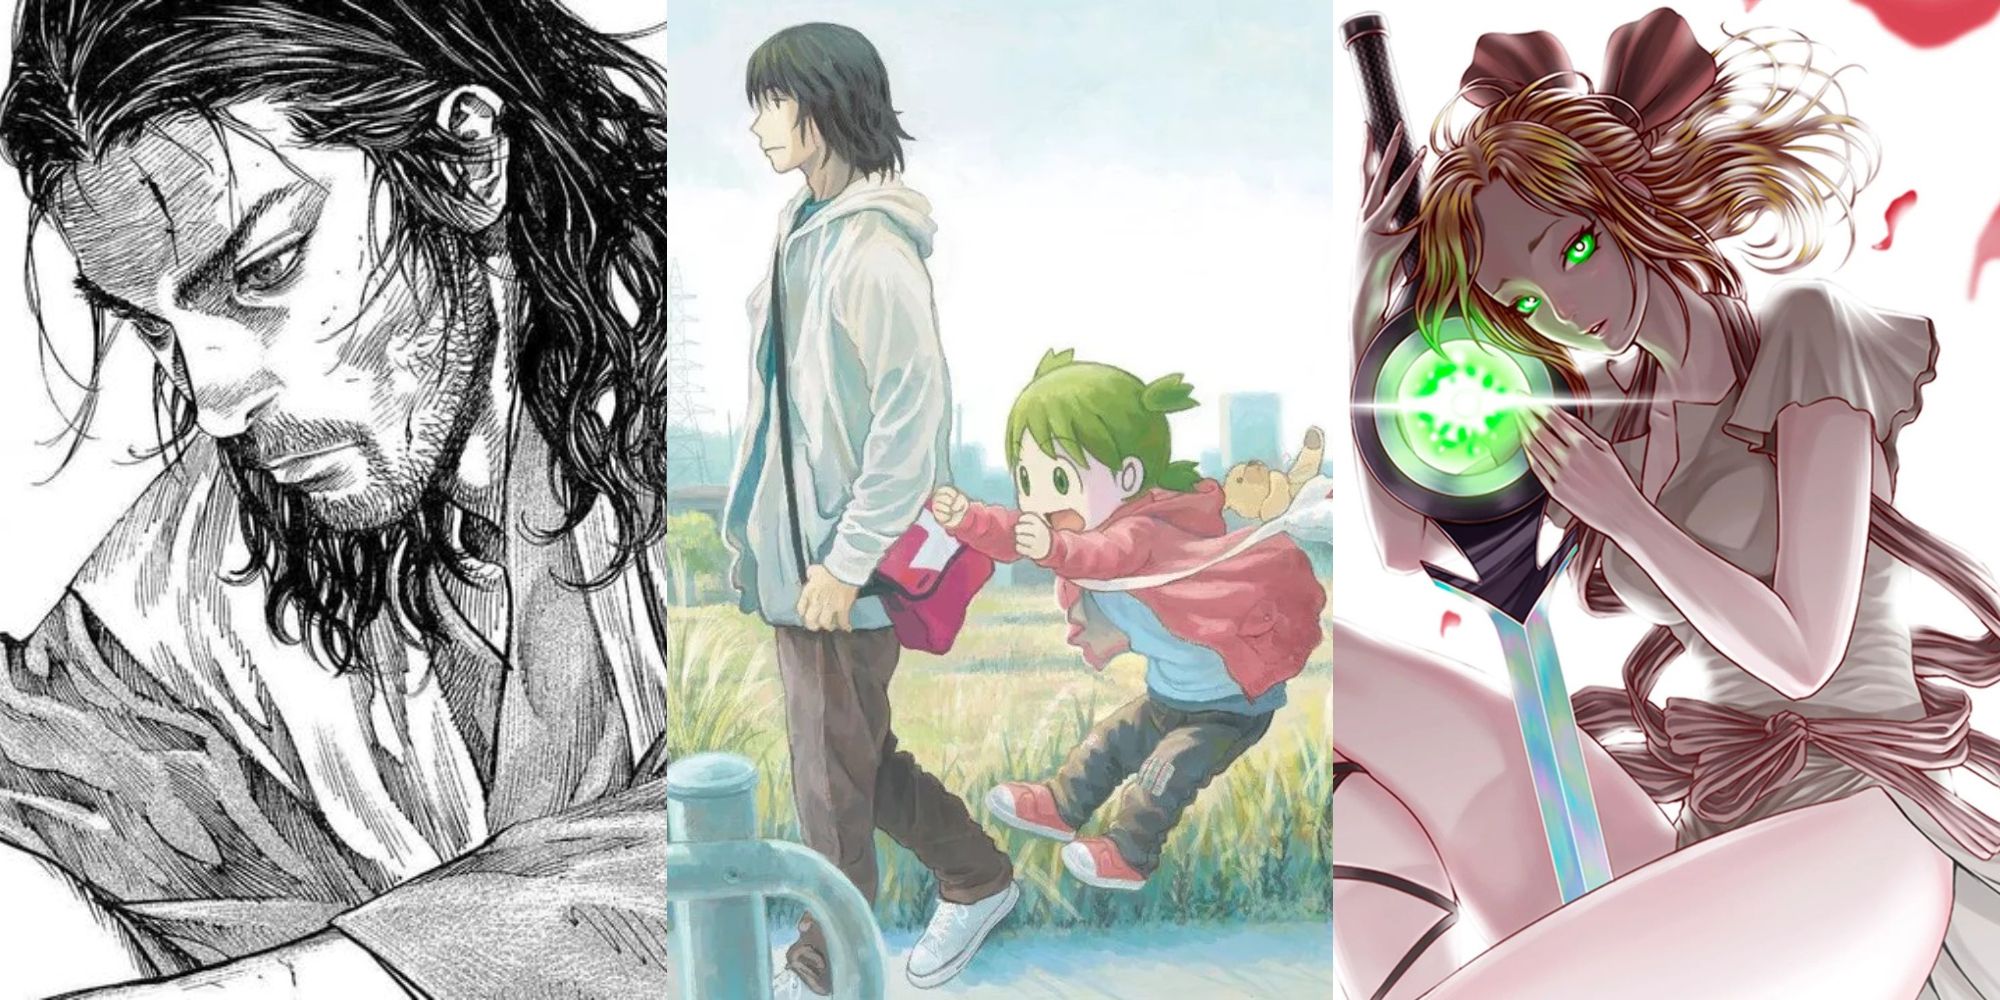 Will a Vagabond anime adaptation ever be made Possibilities explored